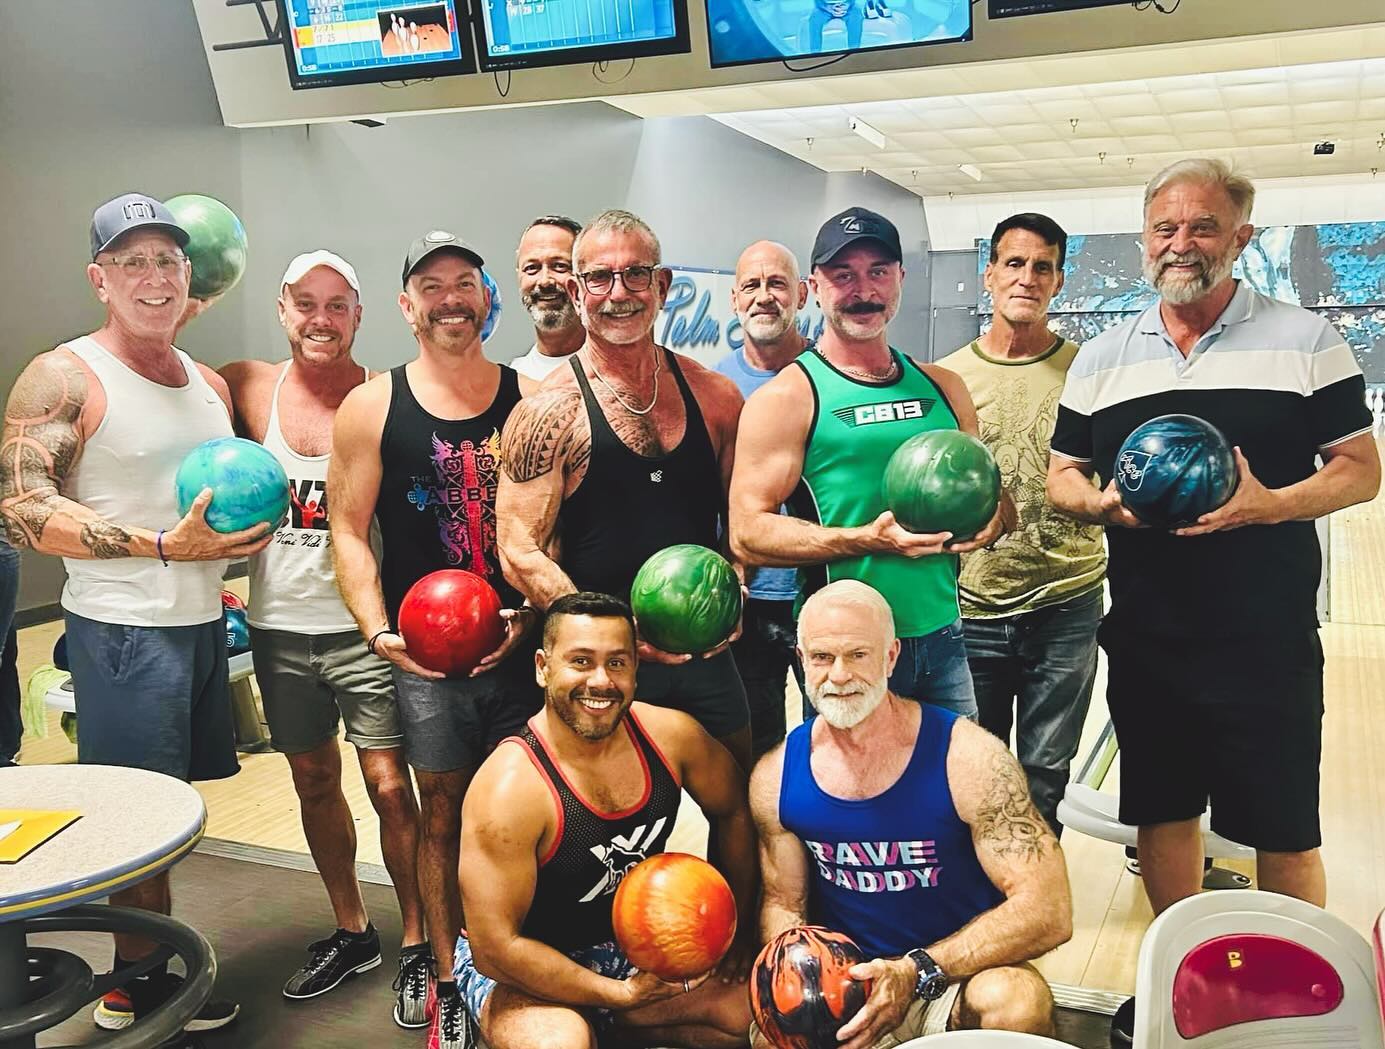 Boys and Balls… what more could you want? 🎳